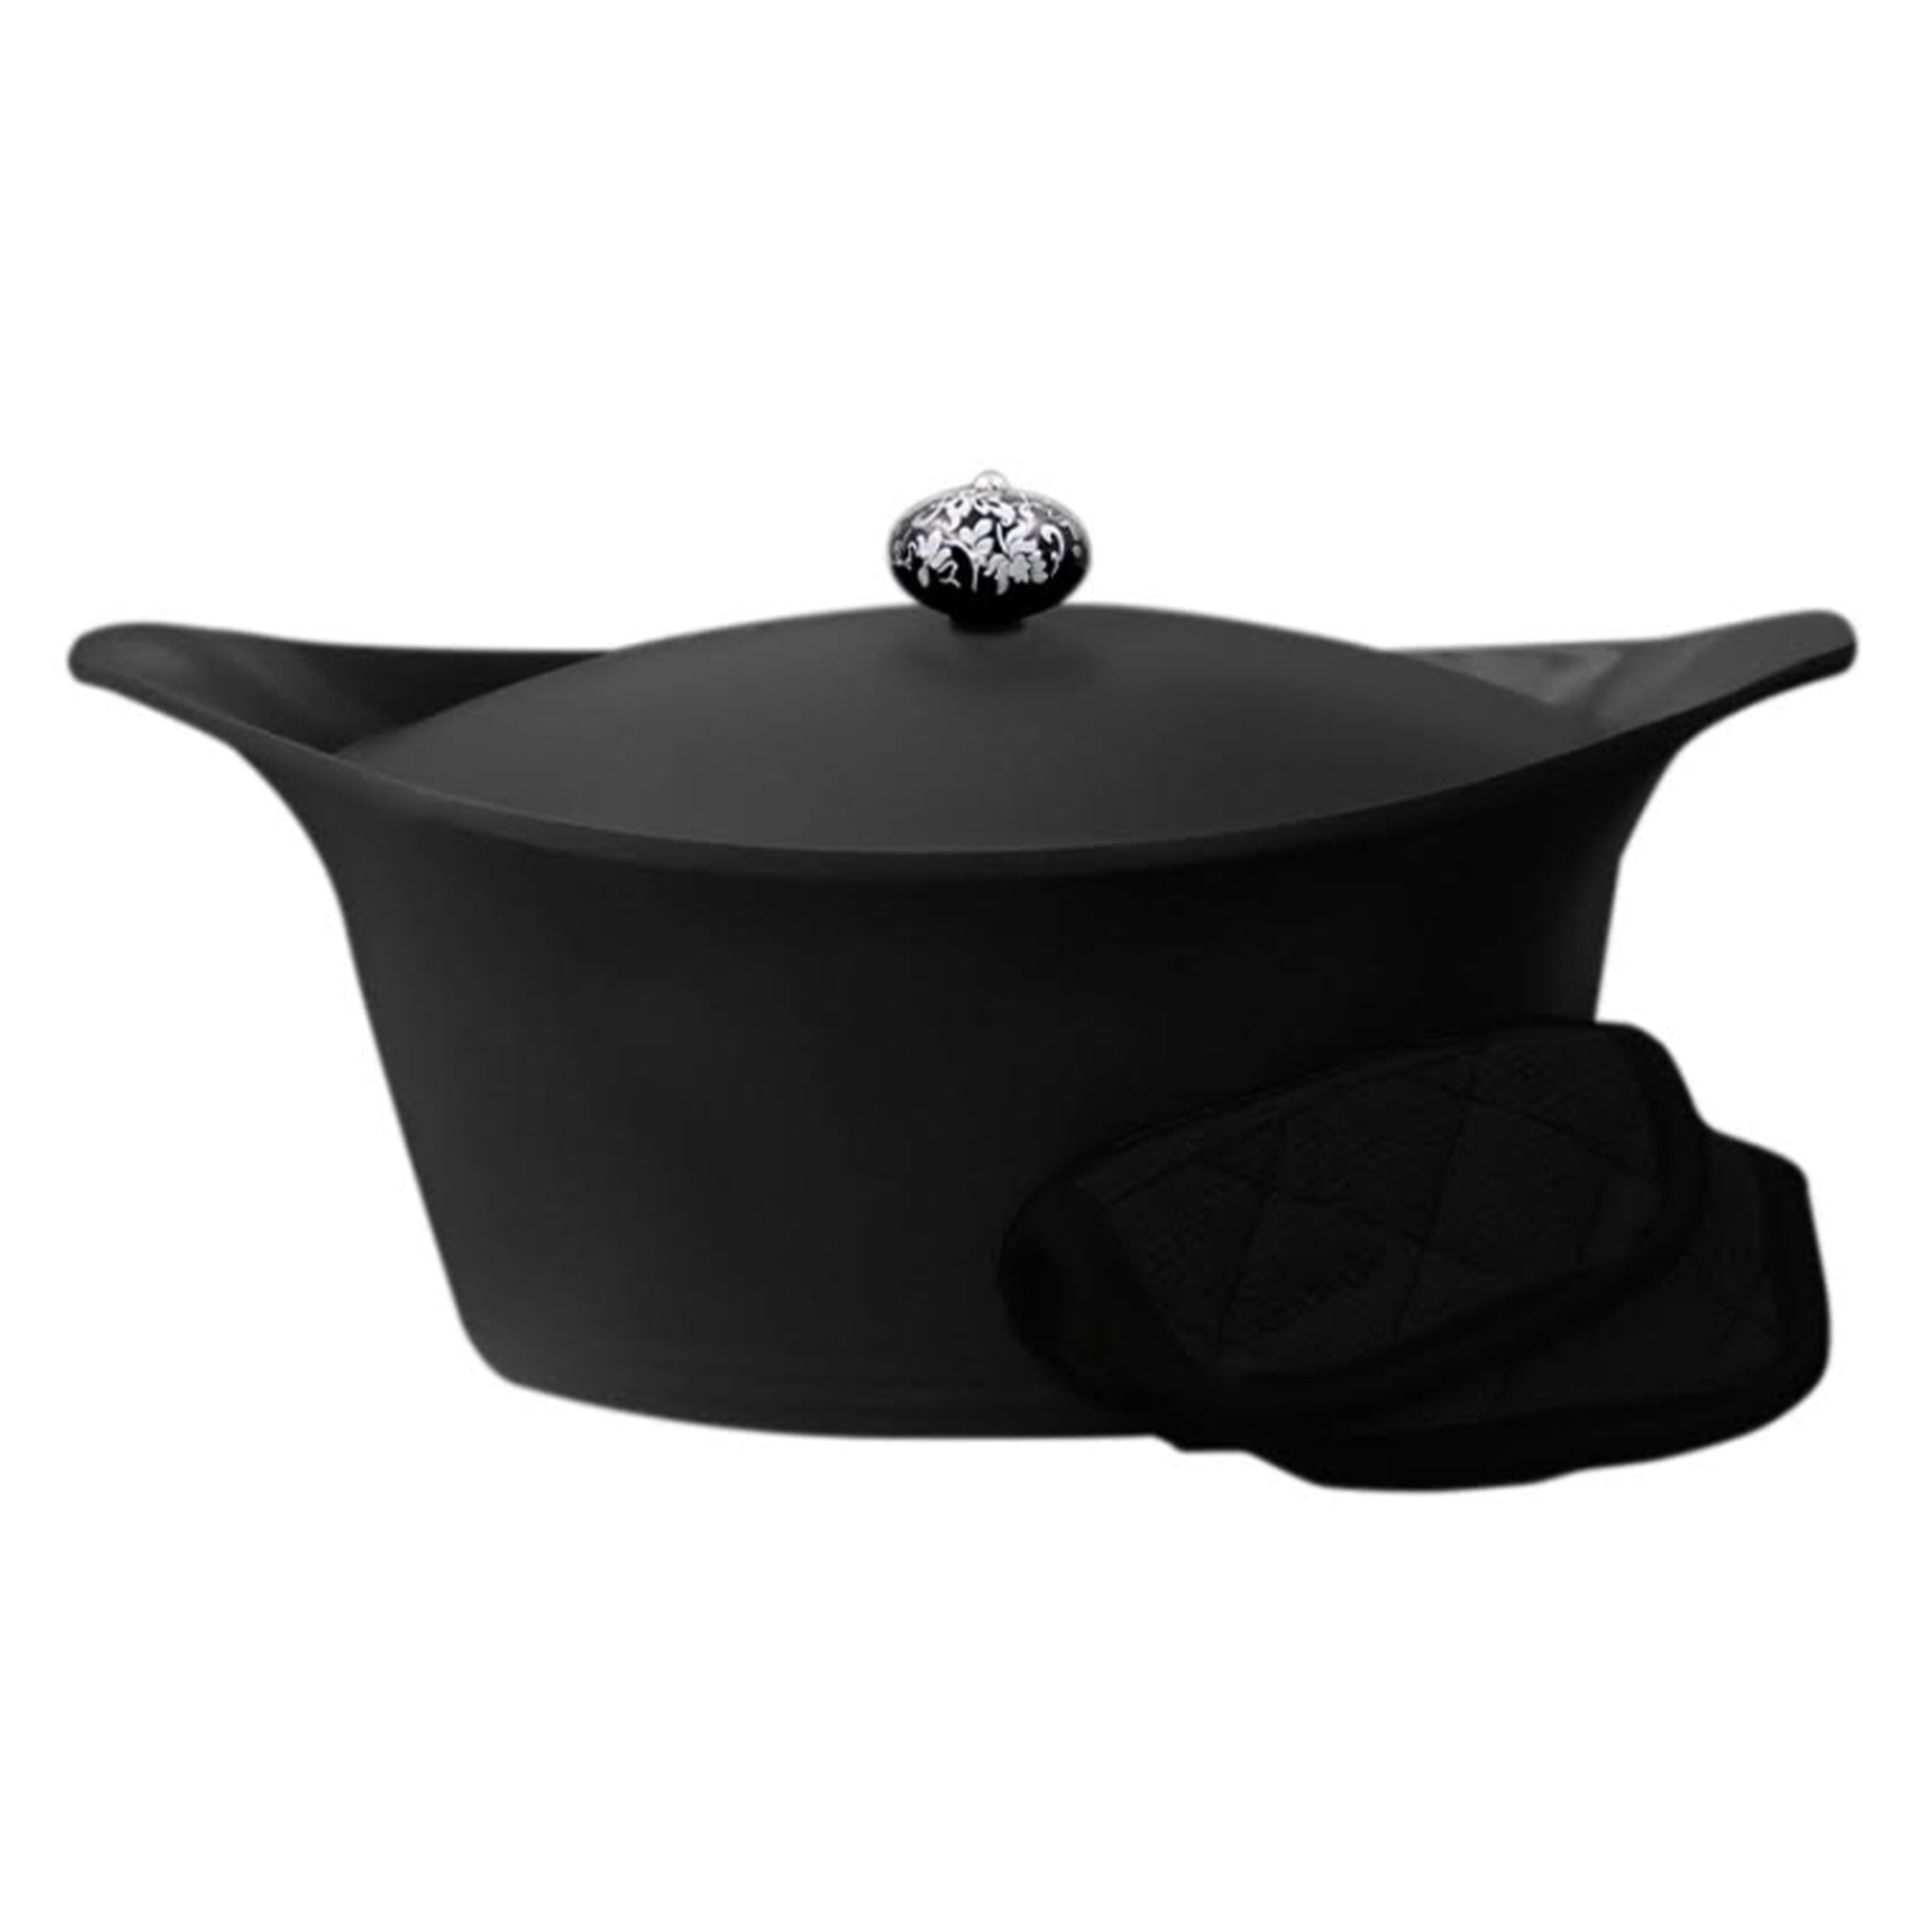 Cookut Multifunction Dutch Oven with Pot Holders, Black